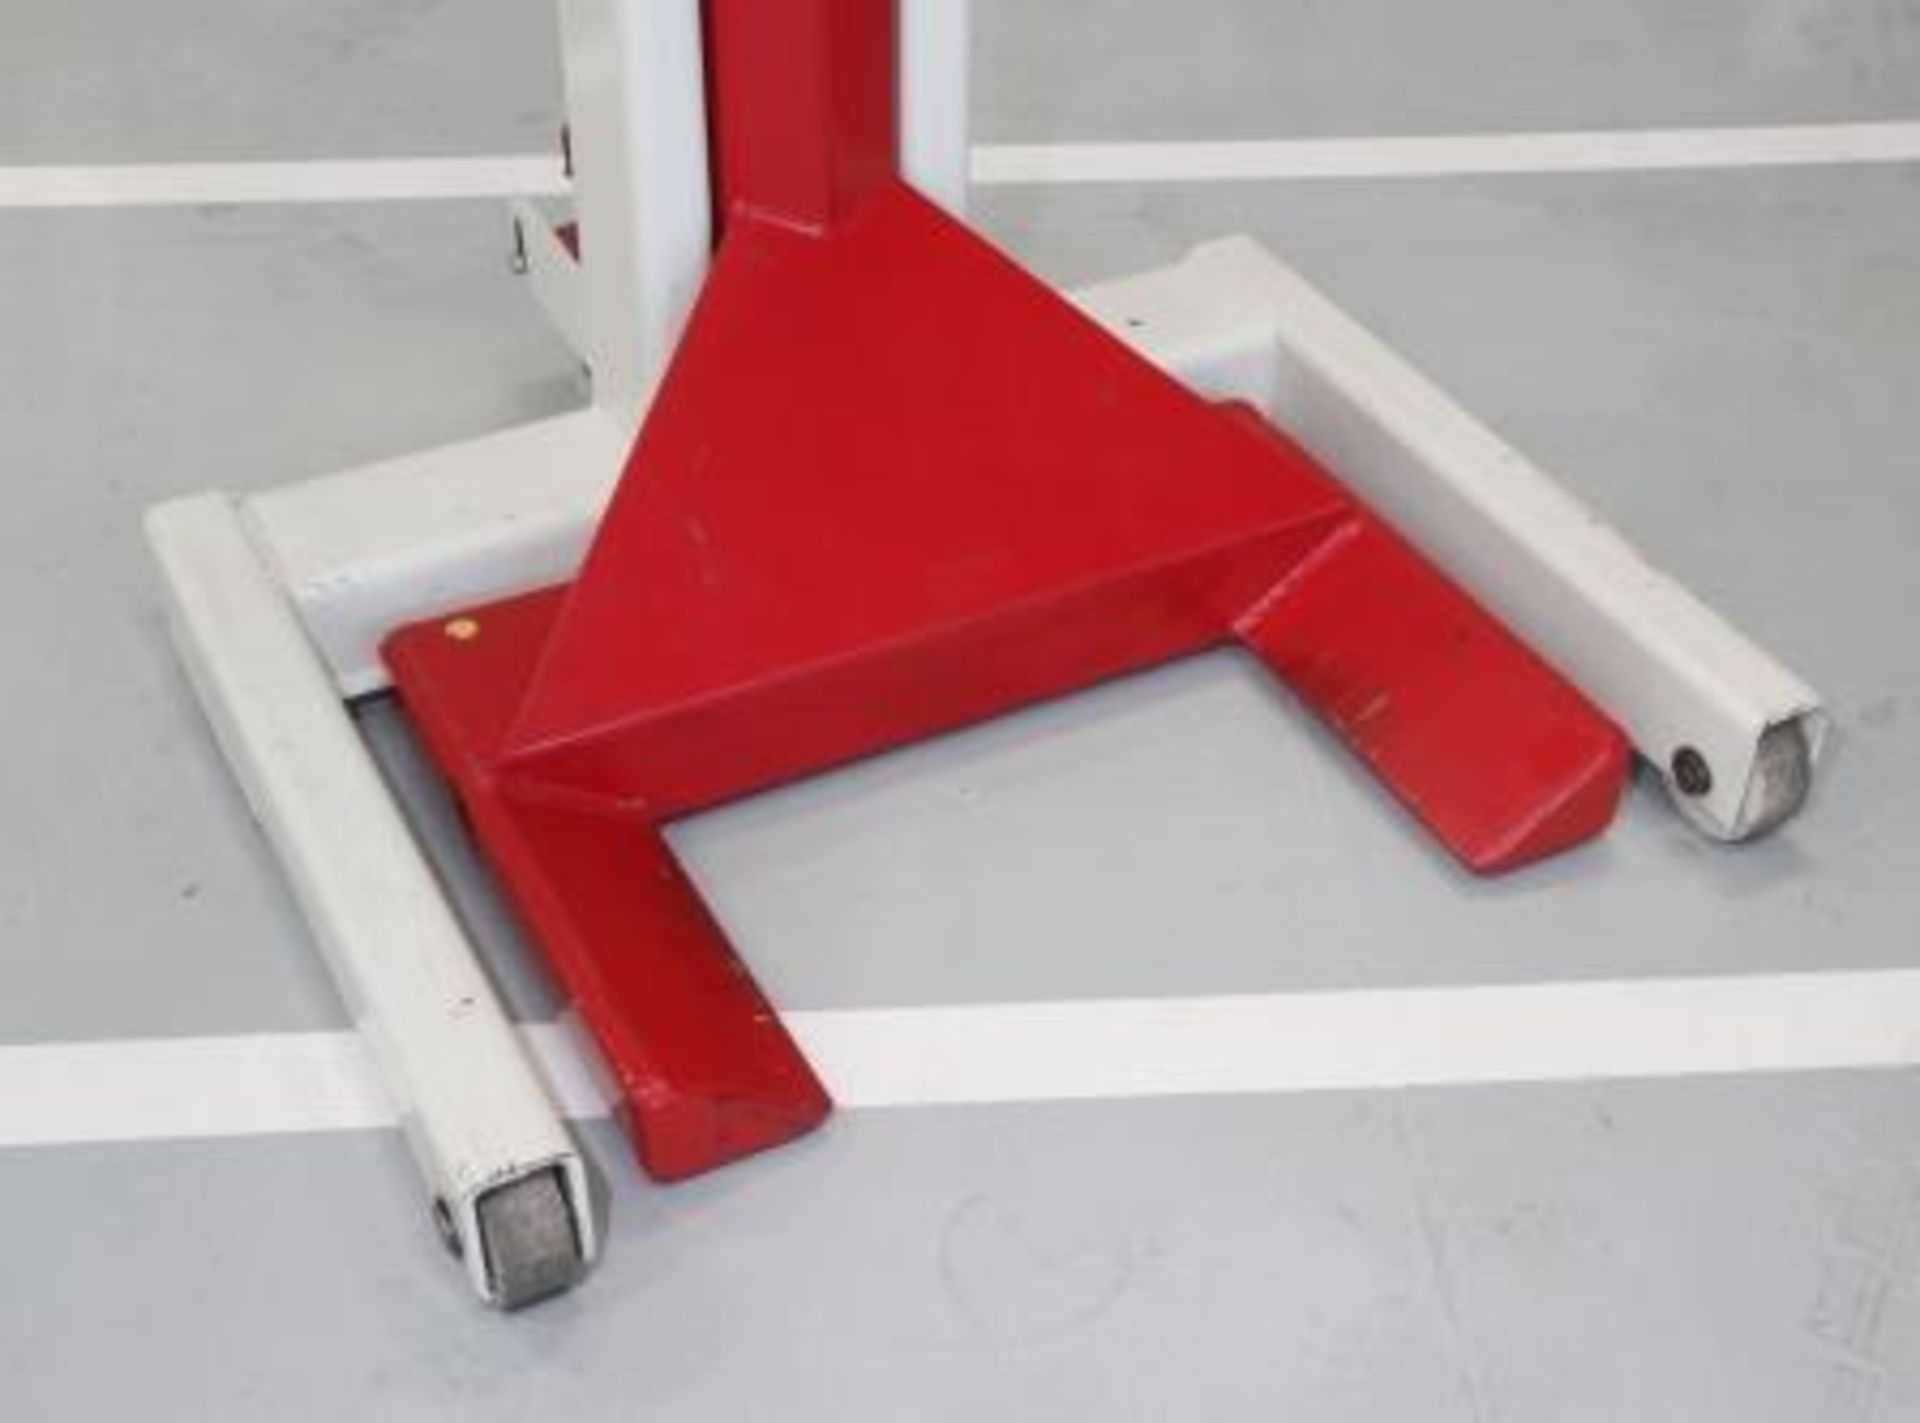 Stertil Koni Mobile Column Lifts (Cabled) - Image 6 of 23